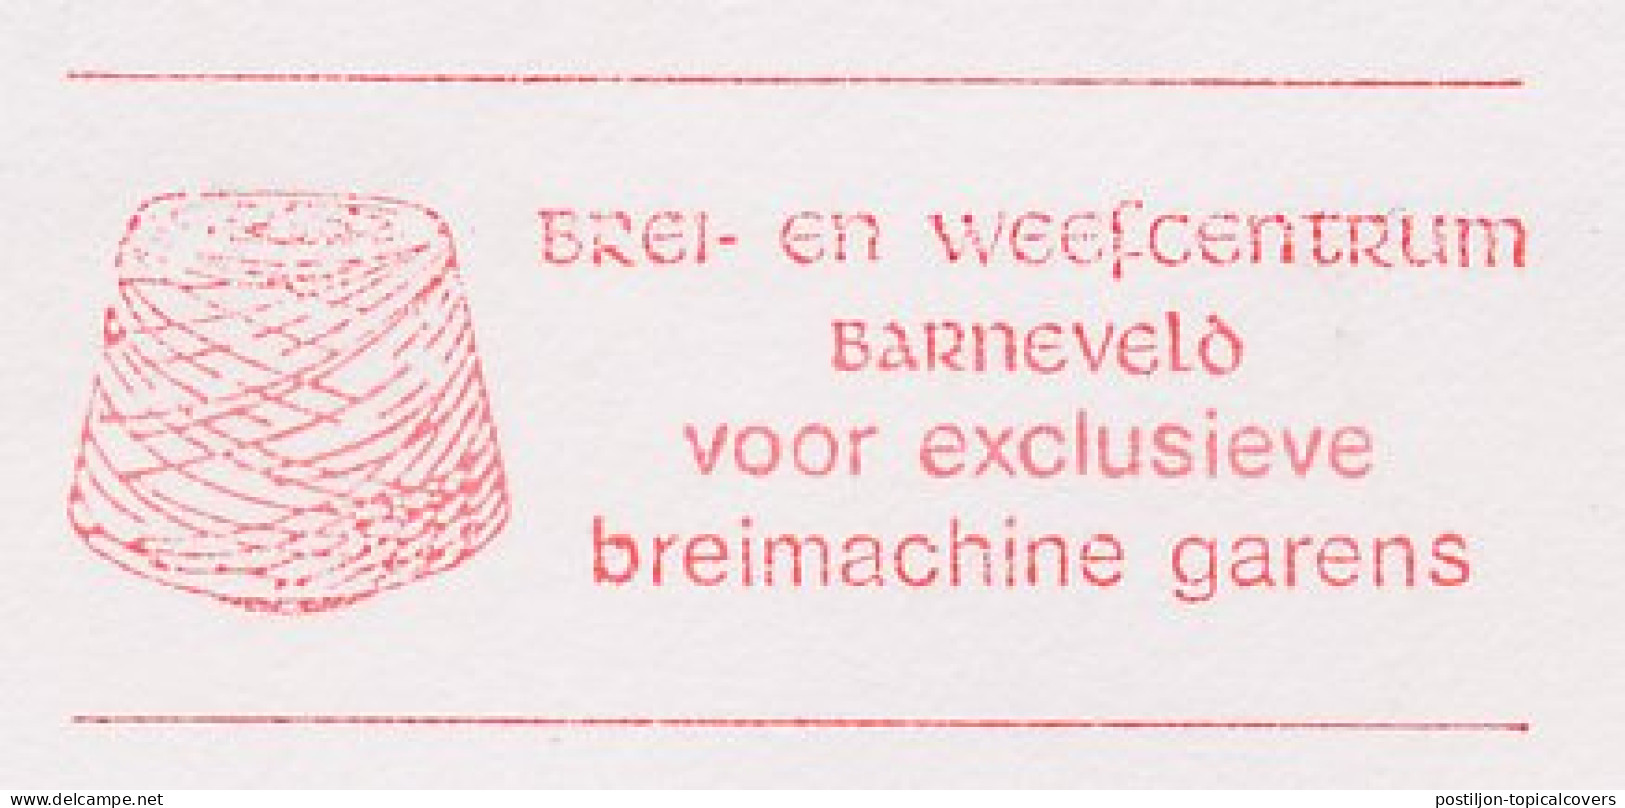 Meter Cover Netherlands 1992 Knit And Weave Center Barneveld - Epe - Textil